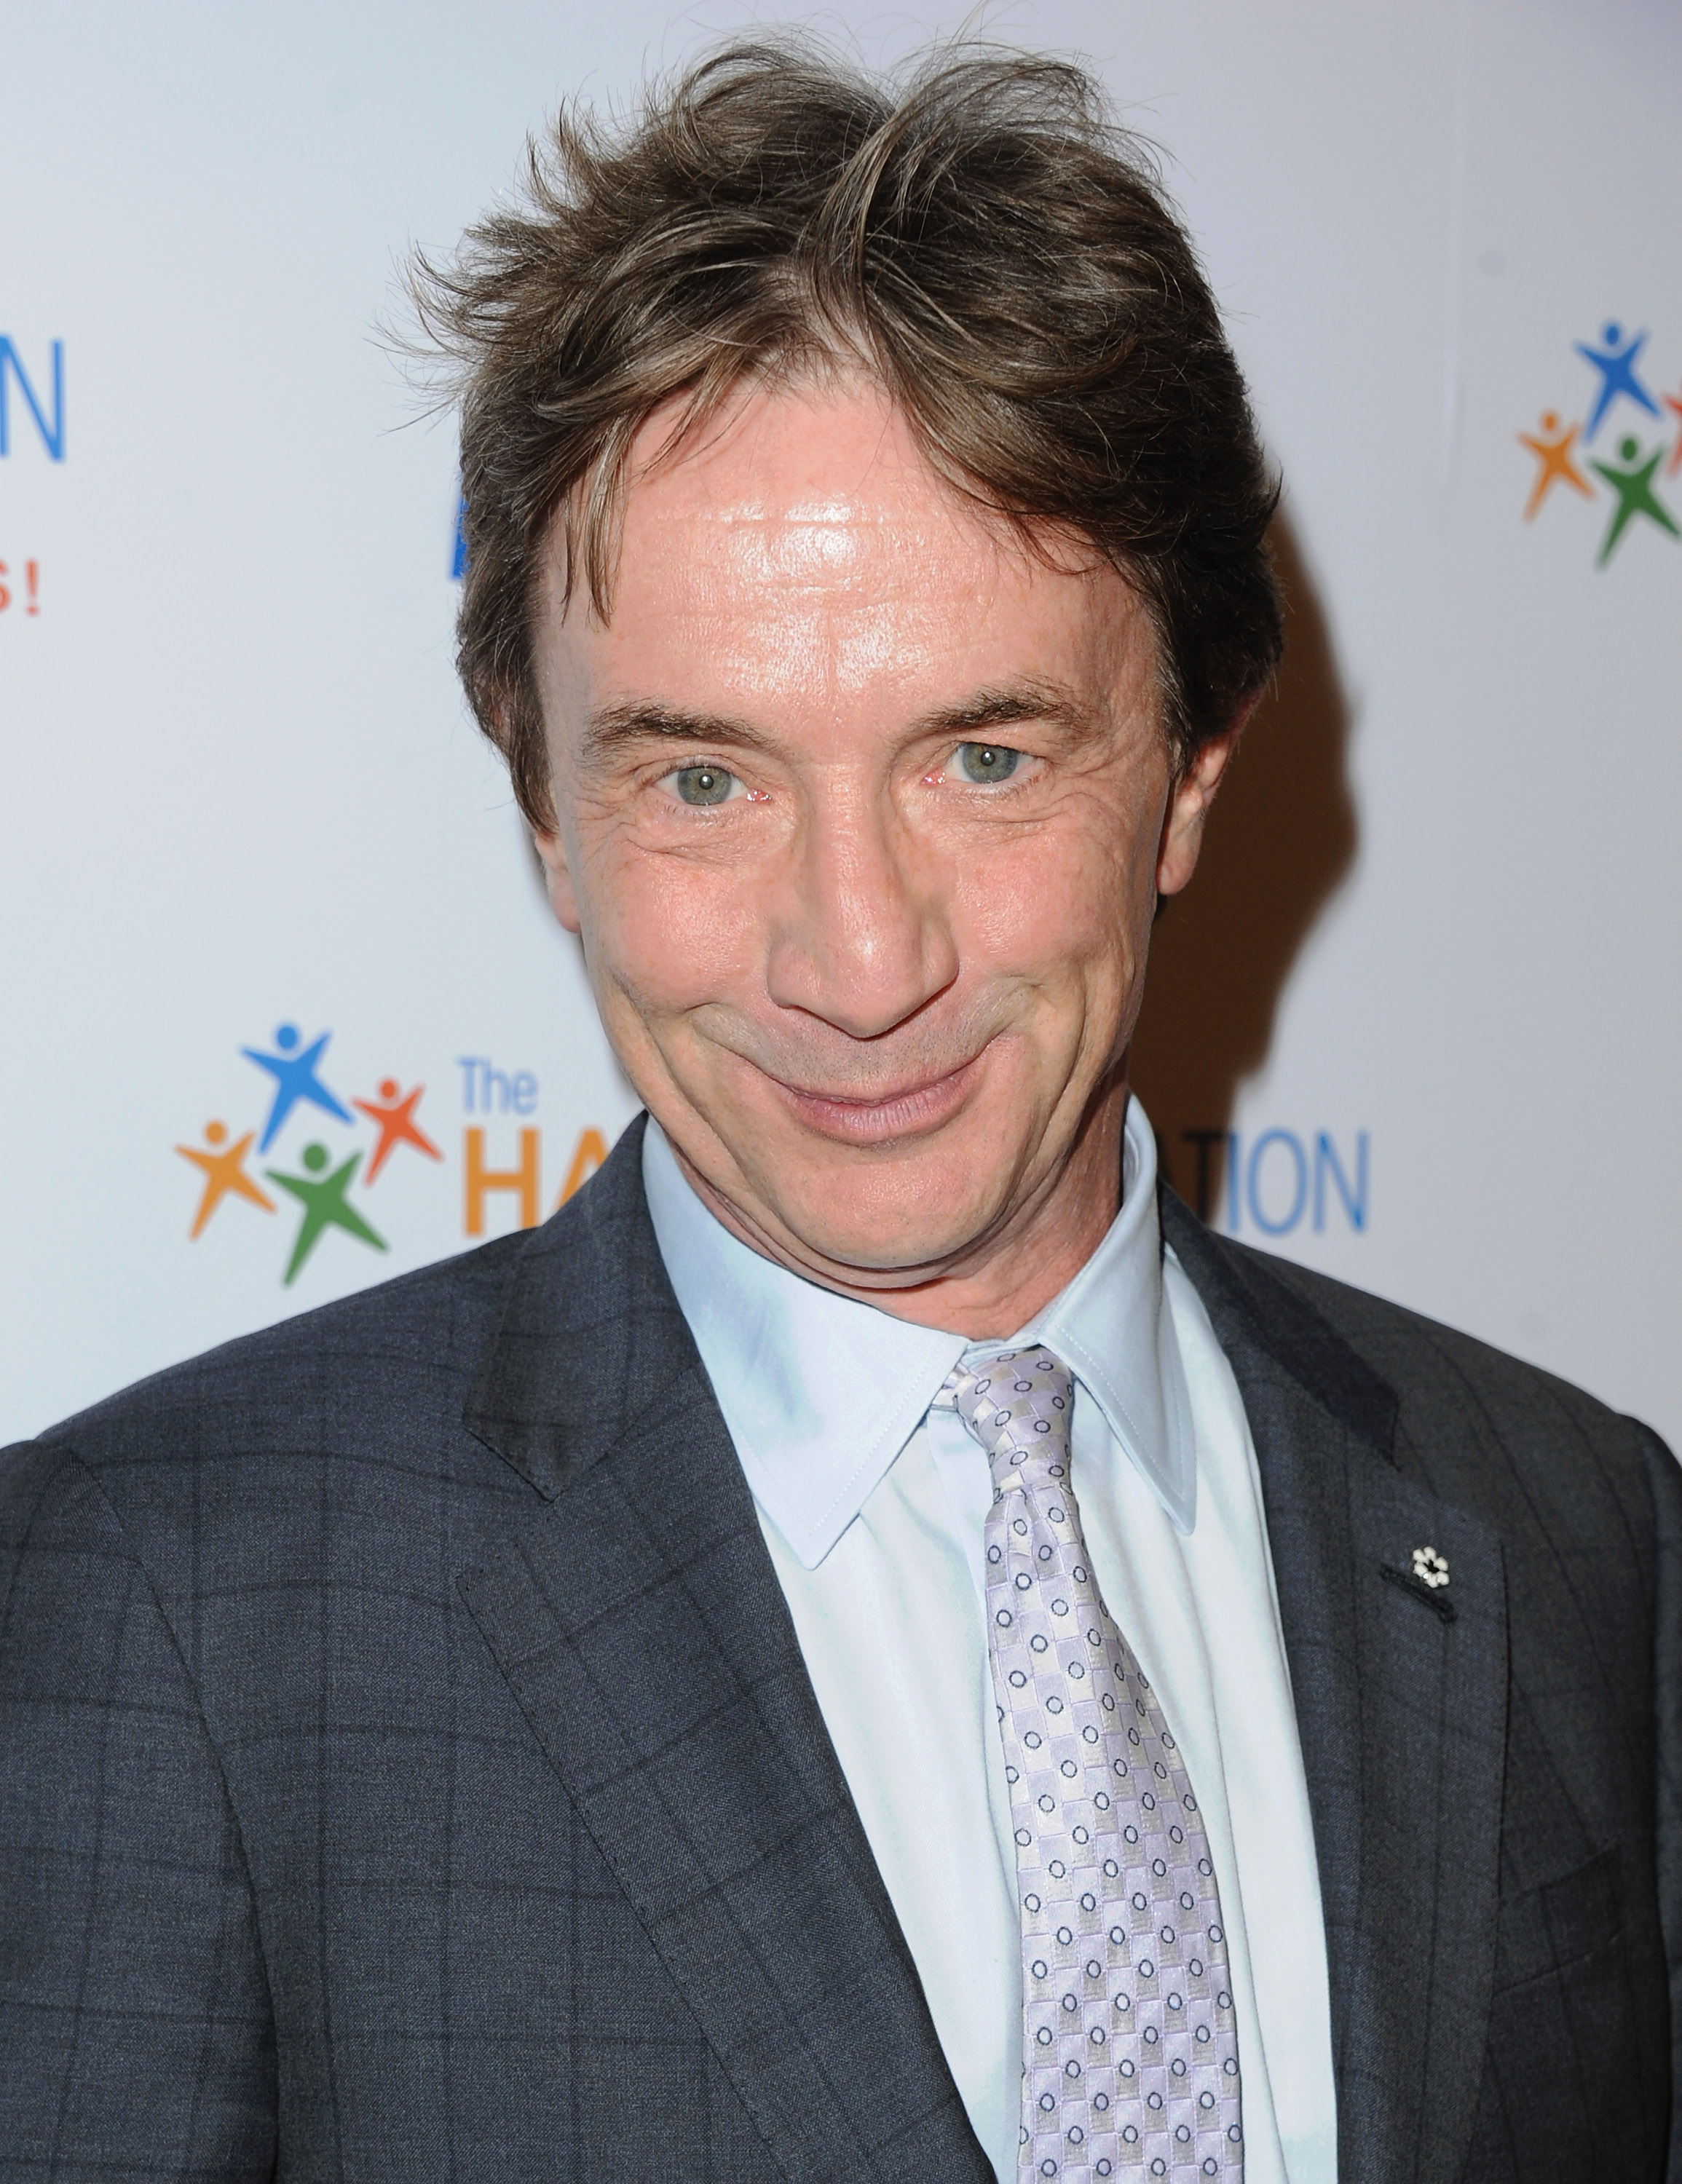 Martin Short arrives at Goldie Hawn's Inaugural "Love In For Kids" Benefiting The Hawn Foundation's MindUp Program at Ron Burkle's Green Acres Estate on November 21, 2014, in Beverly Hills, California. | Source: Getty Images